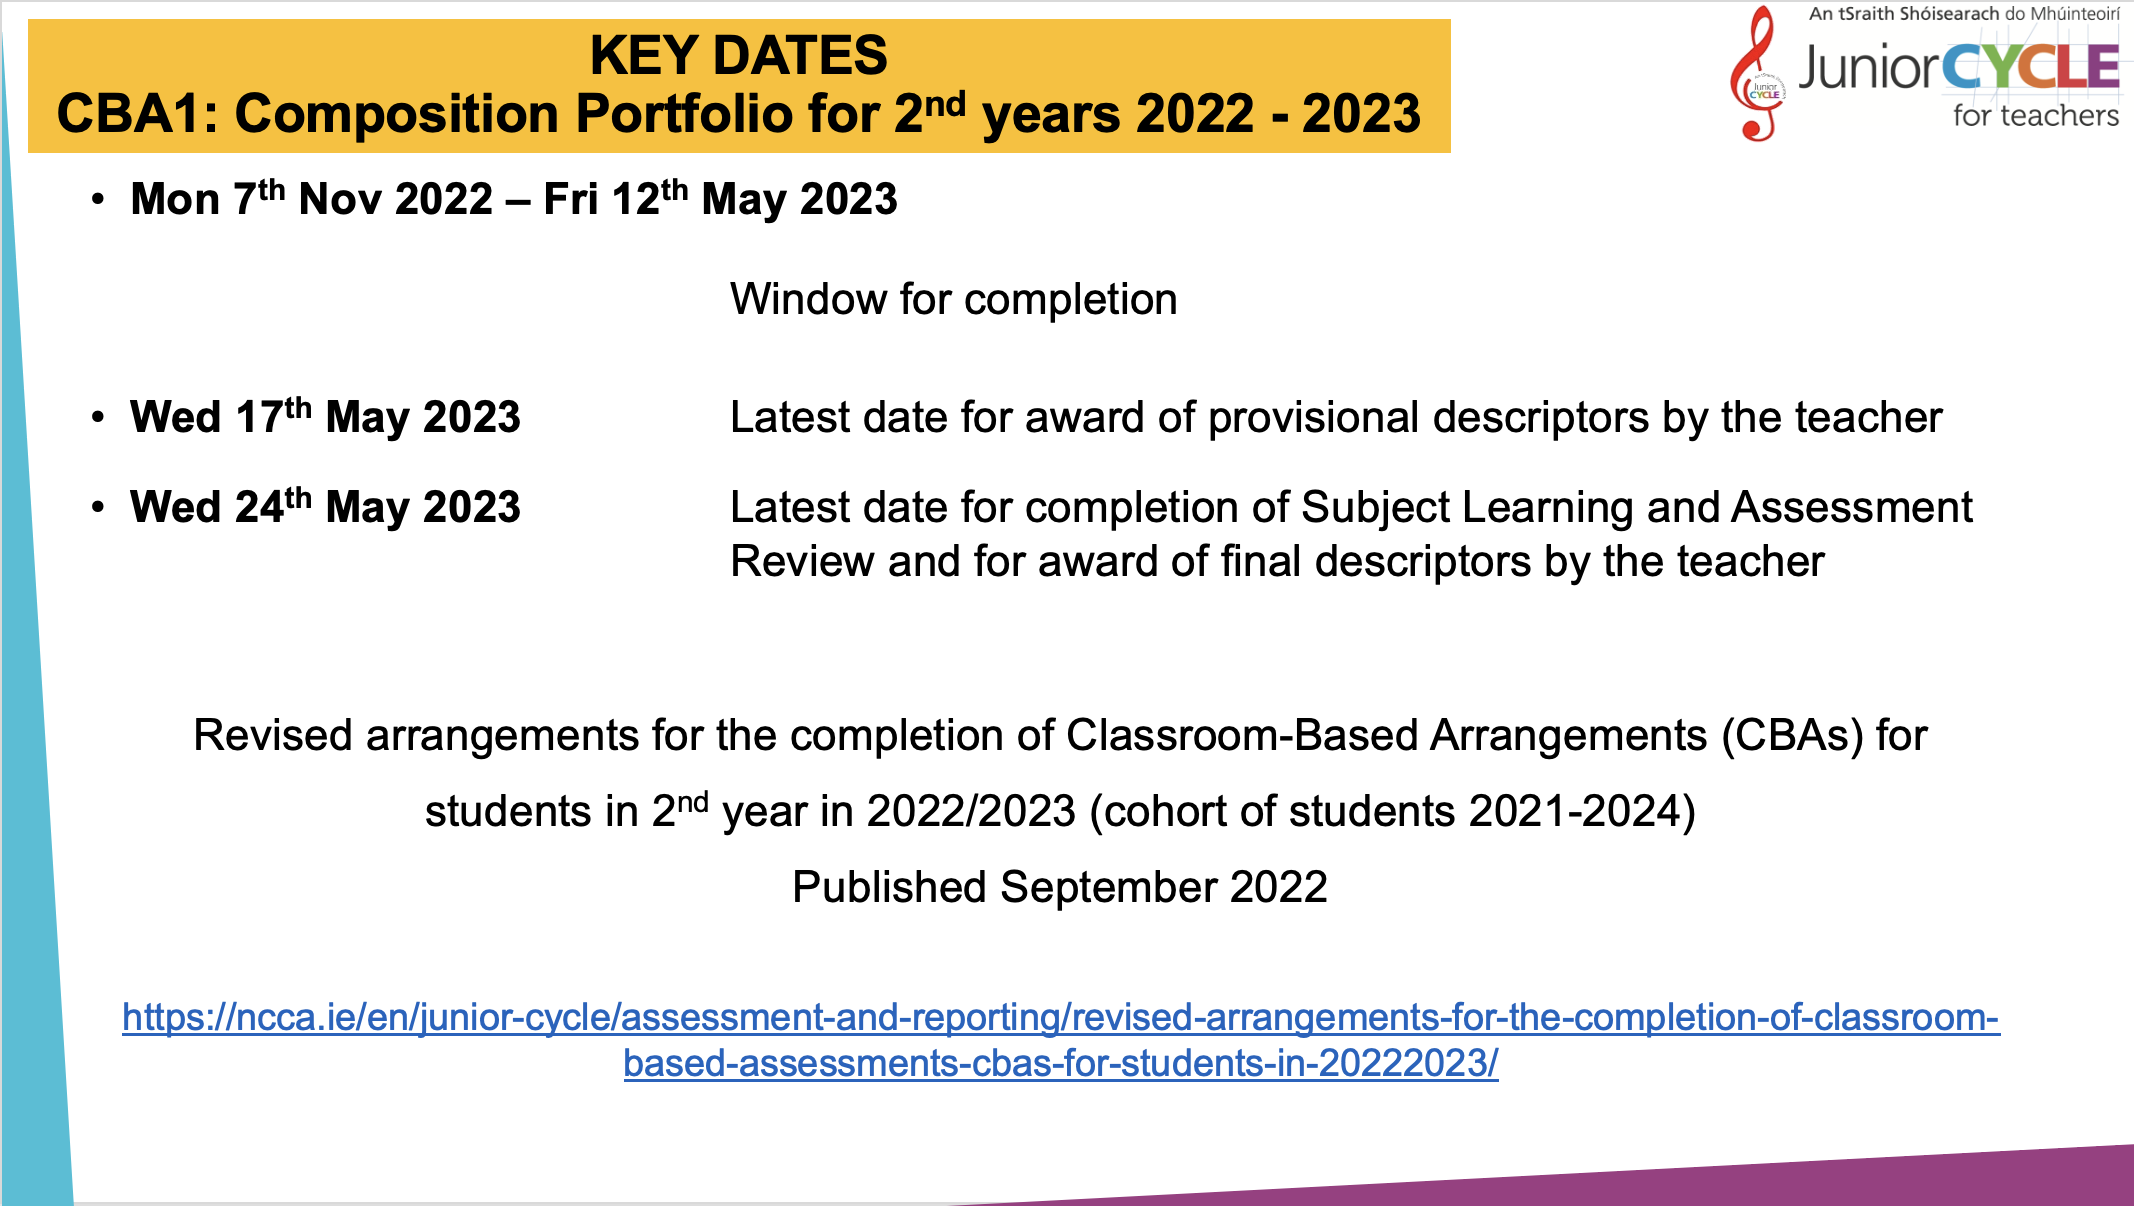 CBA1: Composition Portfolio for 2nd years 2022 - 2023